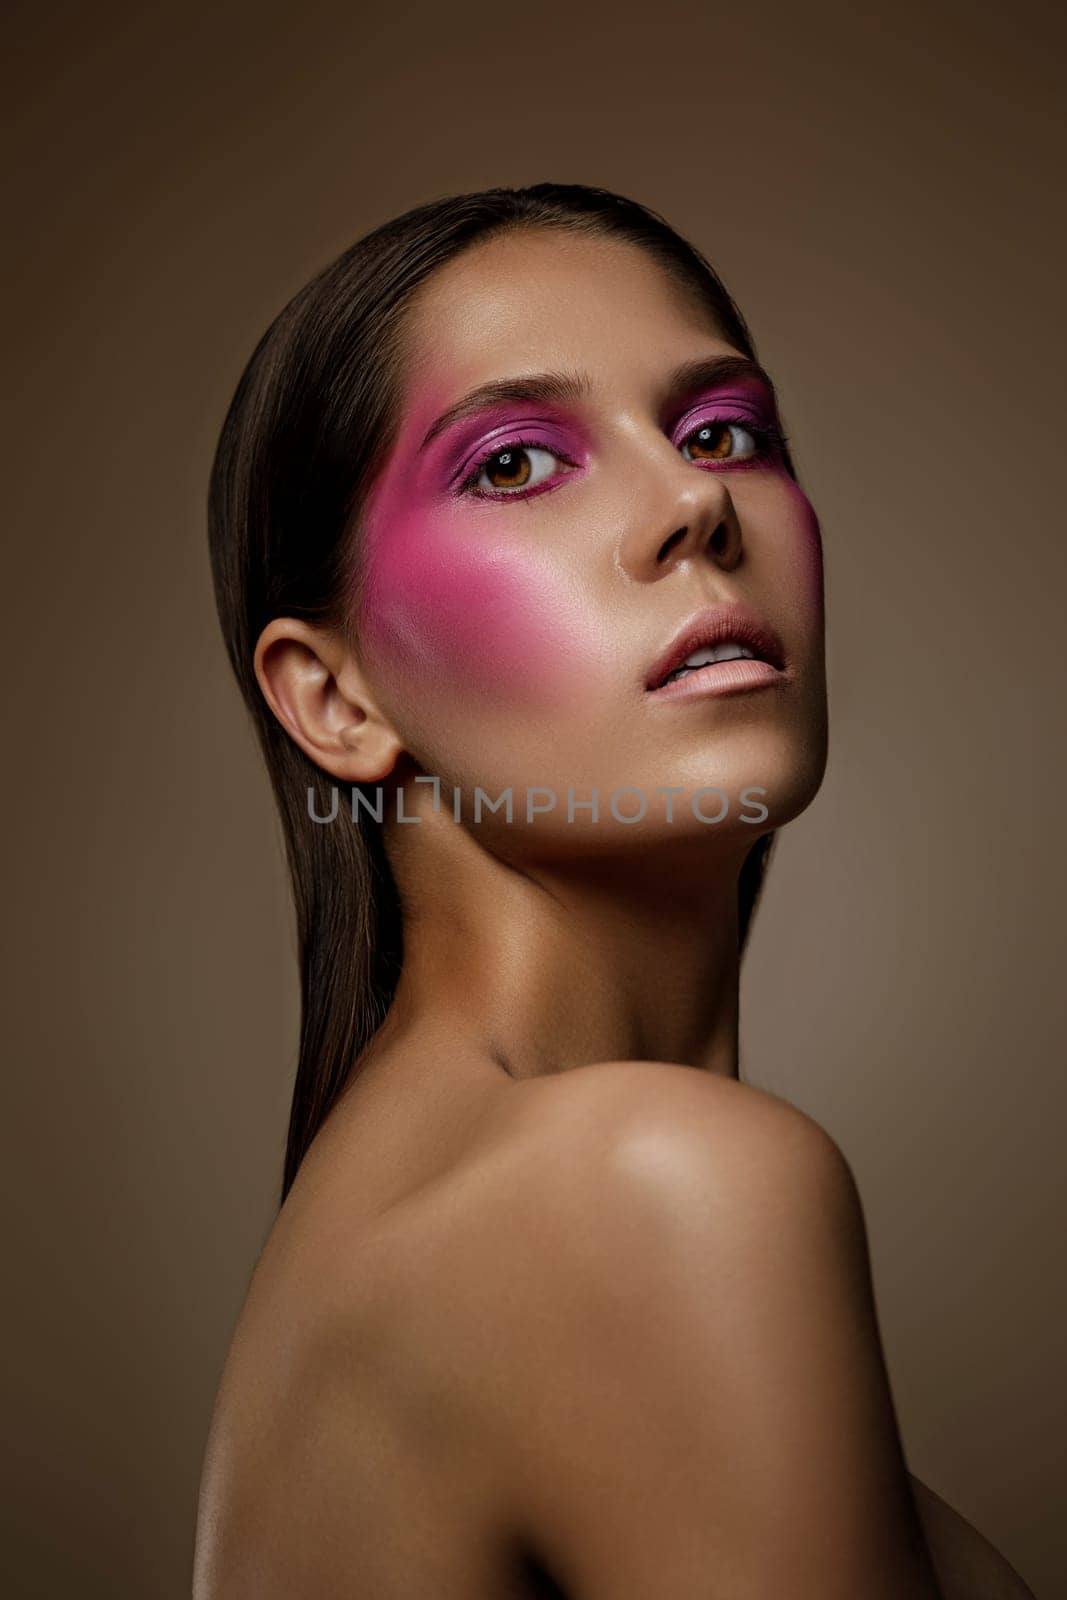 Fashion art skin woman face portrait, closeup. Glamour shiny professional makeup girl with trendy pink make-up